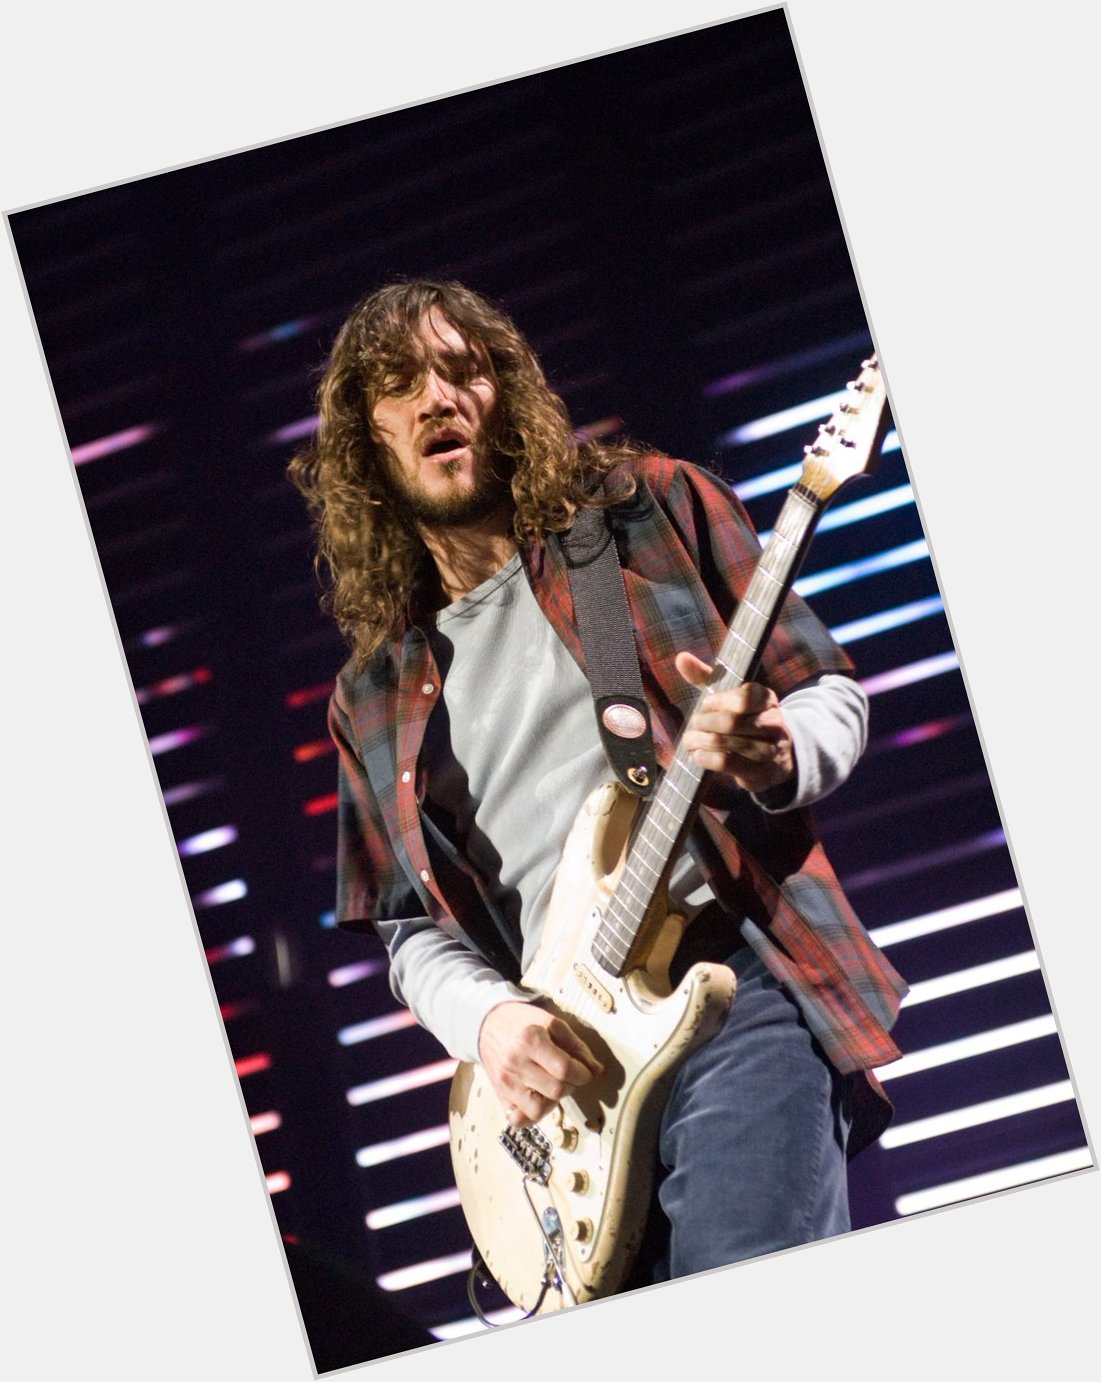 Happy Birthday John Frusciante! 
This man and his songwriting has been an endless inspiring journey within myself. 